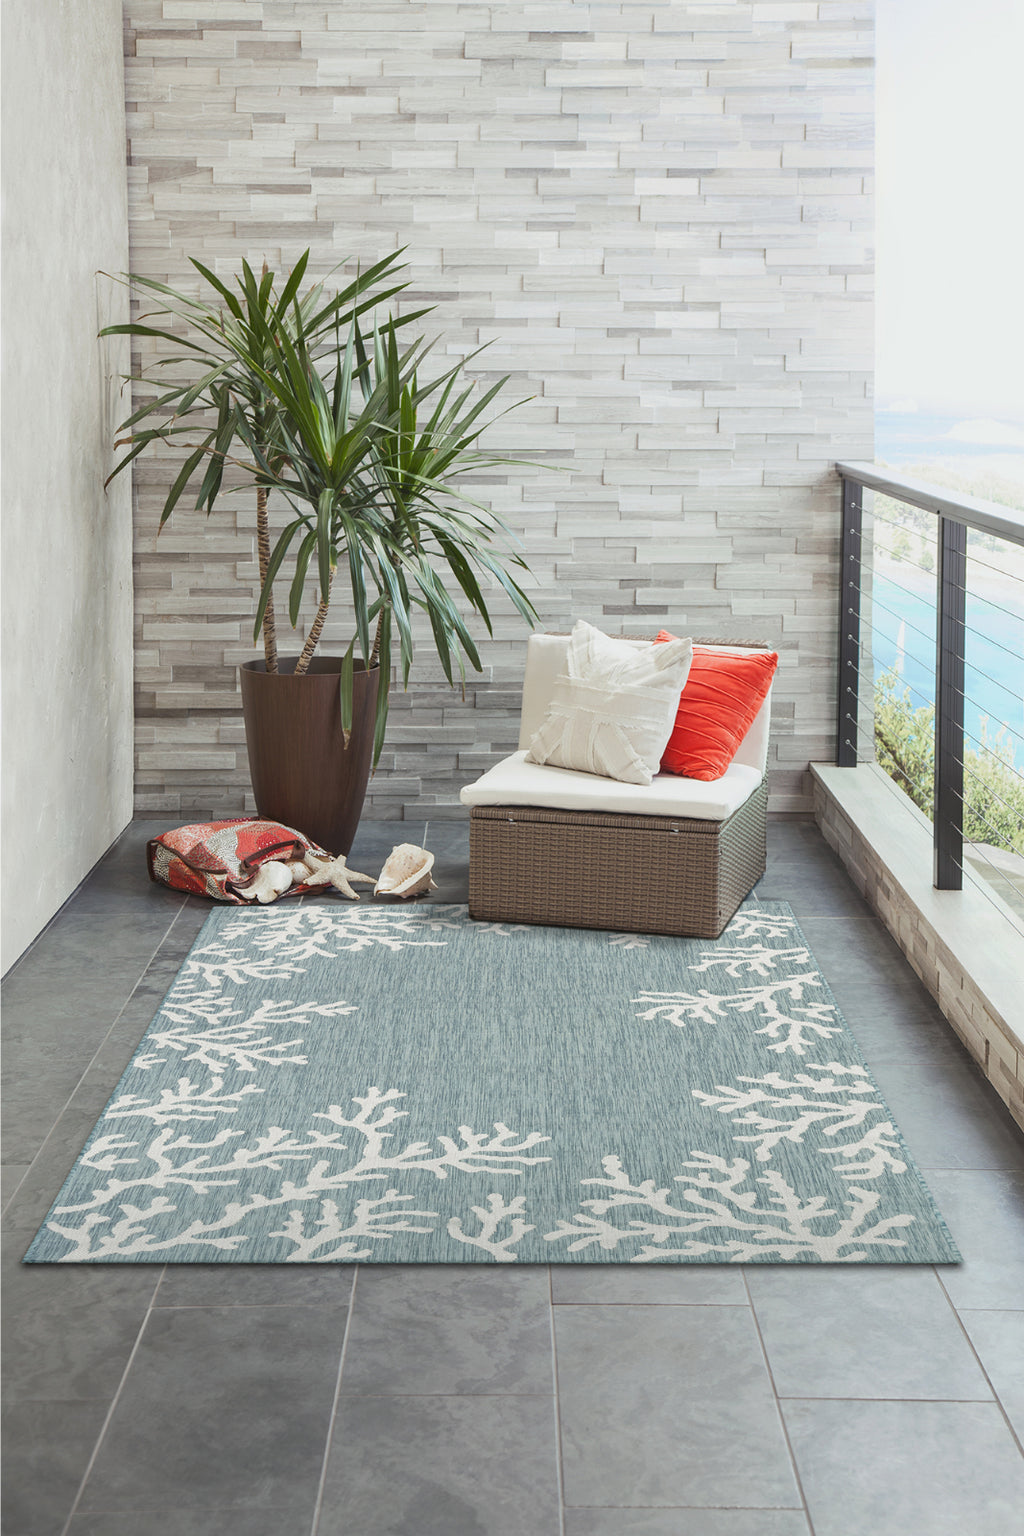 Trans Ocean Carmel 8448/04 Coral Border Blue Area Rug by Liora Manne Room Scene Image Feature